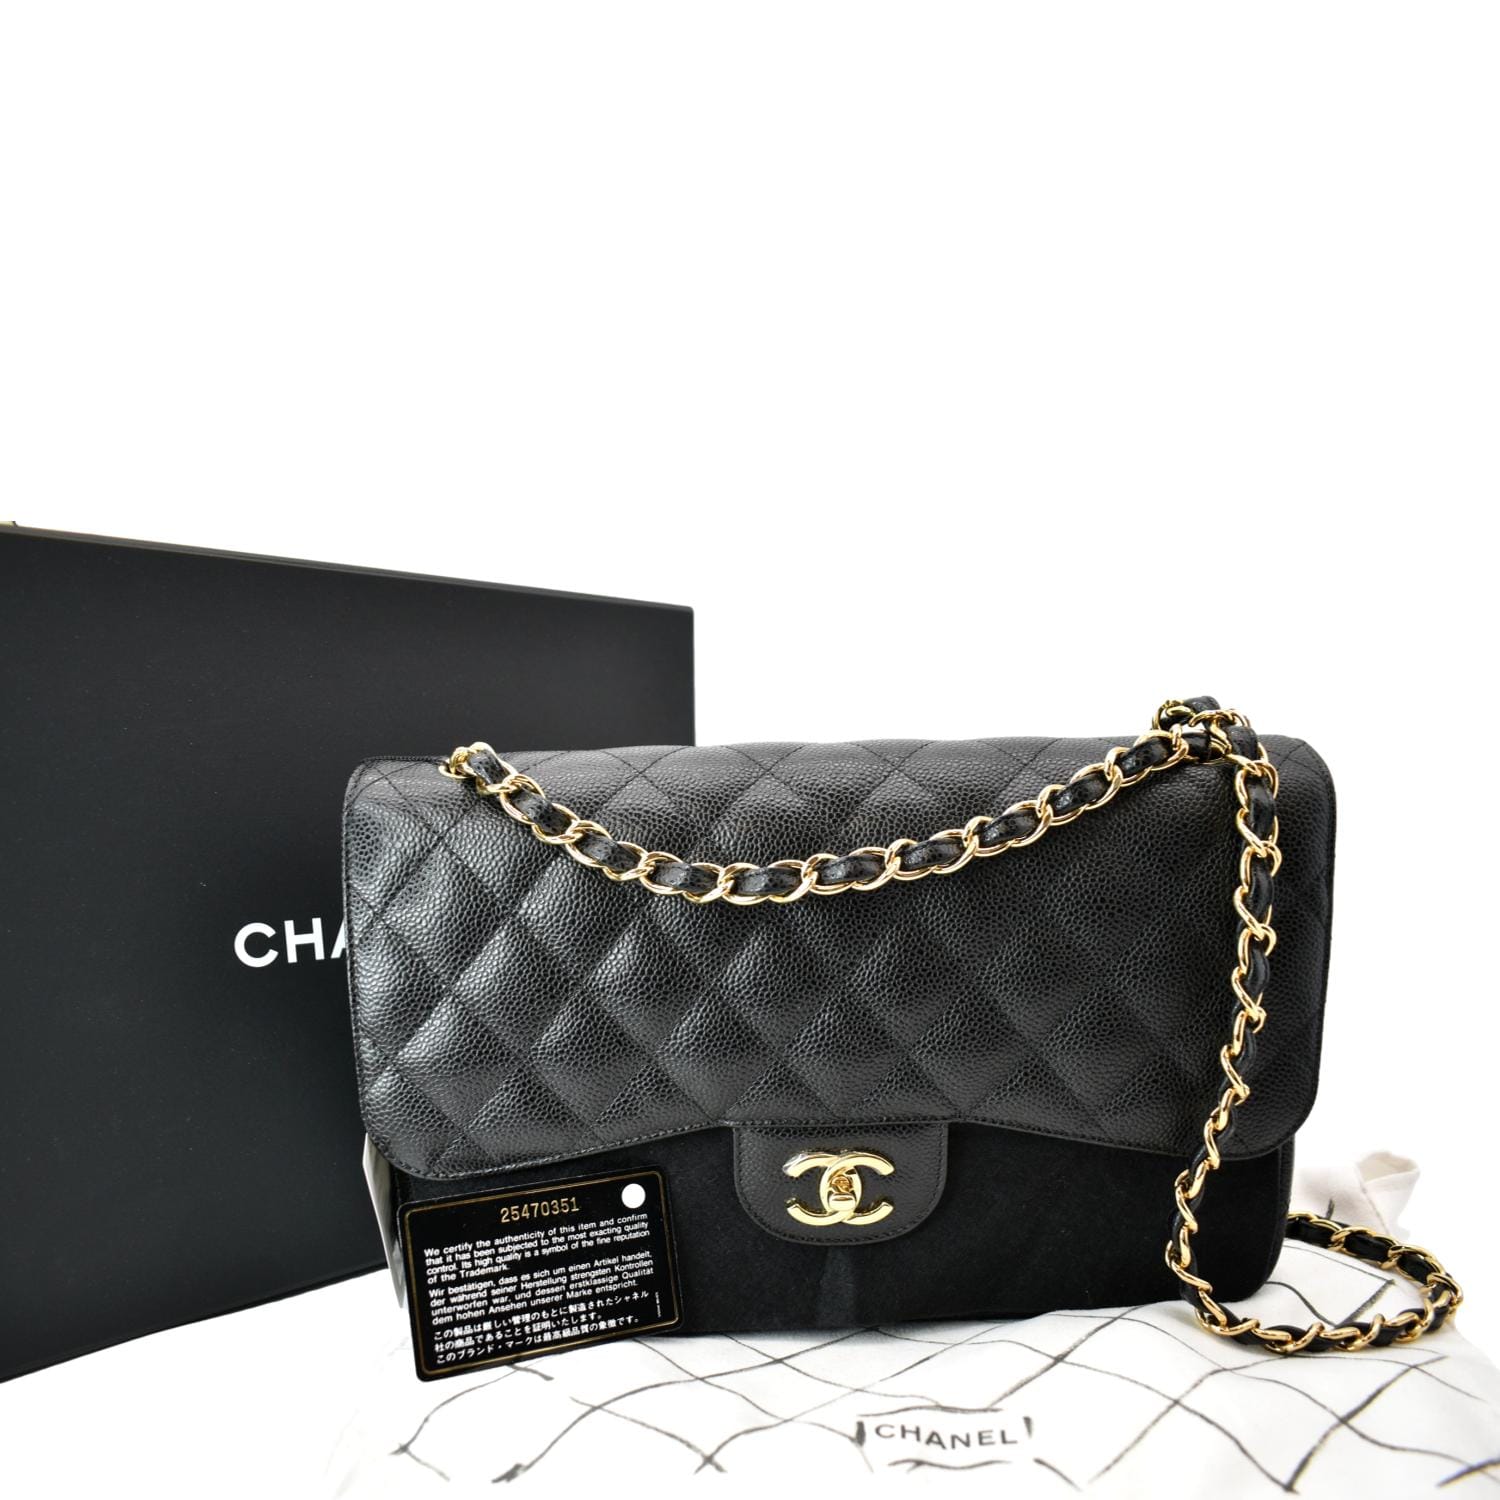 reserved* Chanel Beige Caviar Leather Classic Flap Bag Jumbo